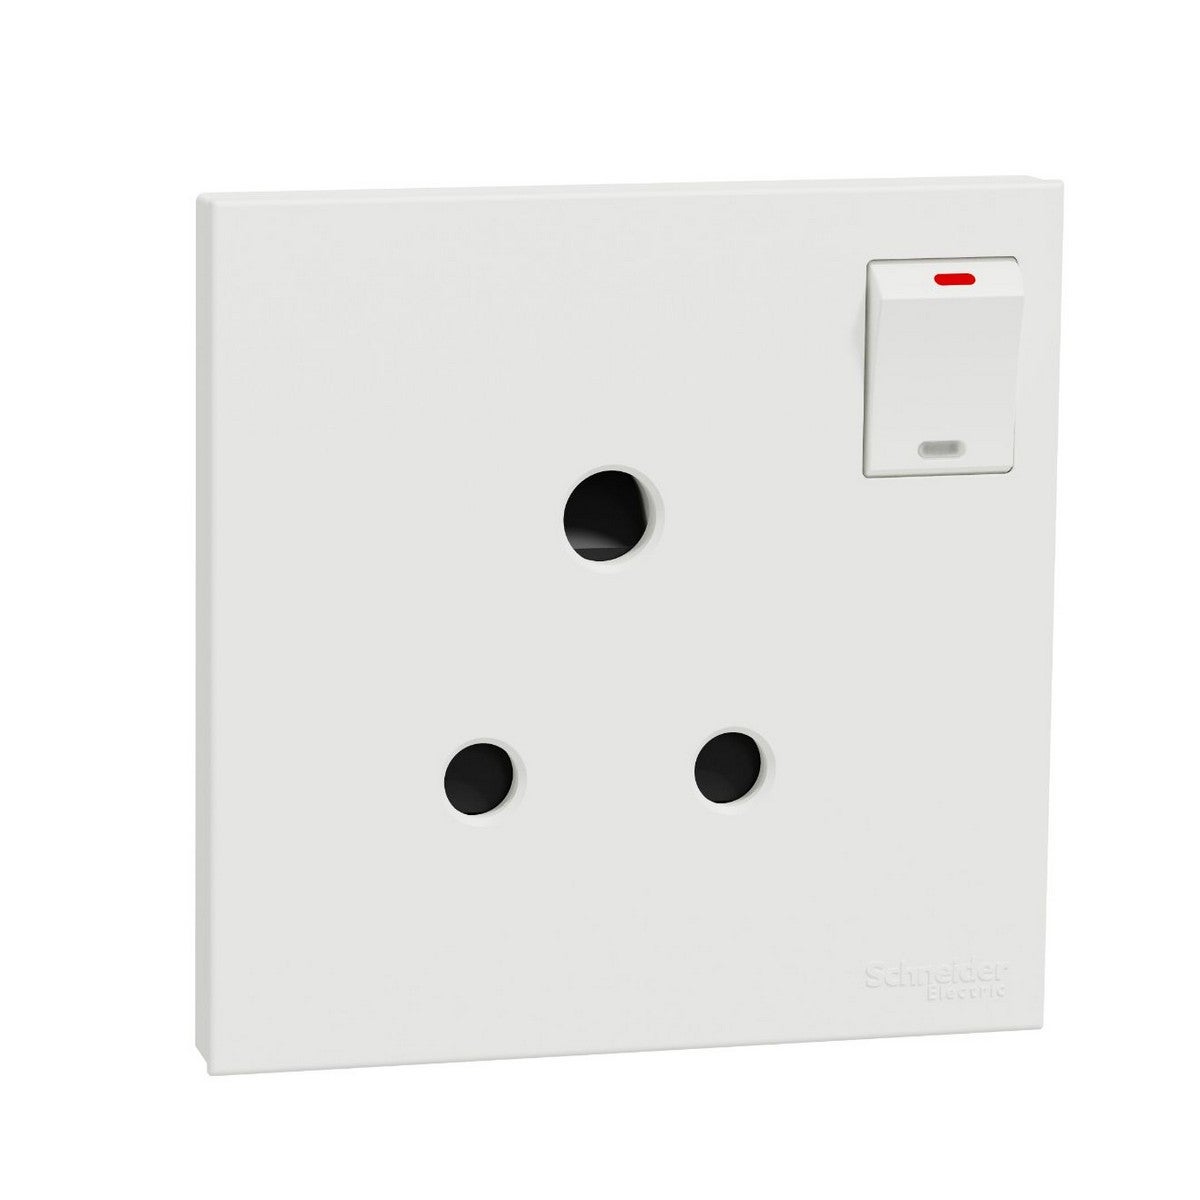 AvatarOn C, Switched socket, 15A 250V, 1 gang, 3 round pin, white